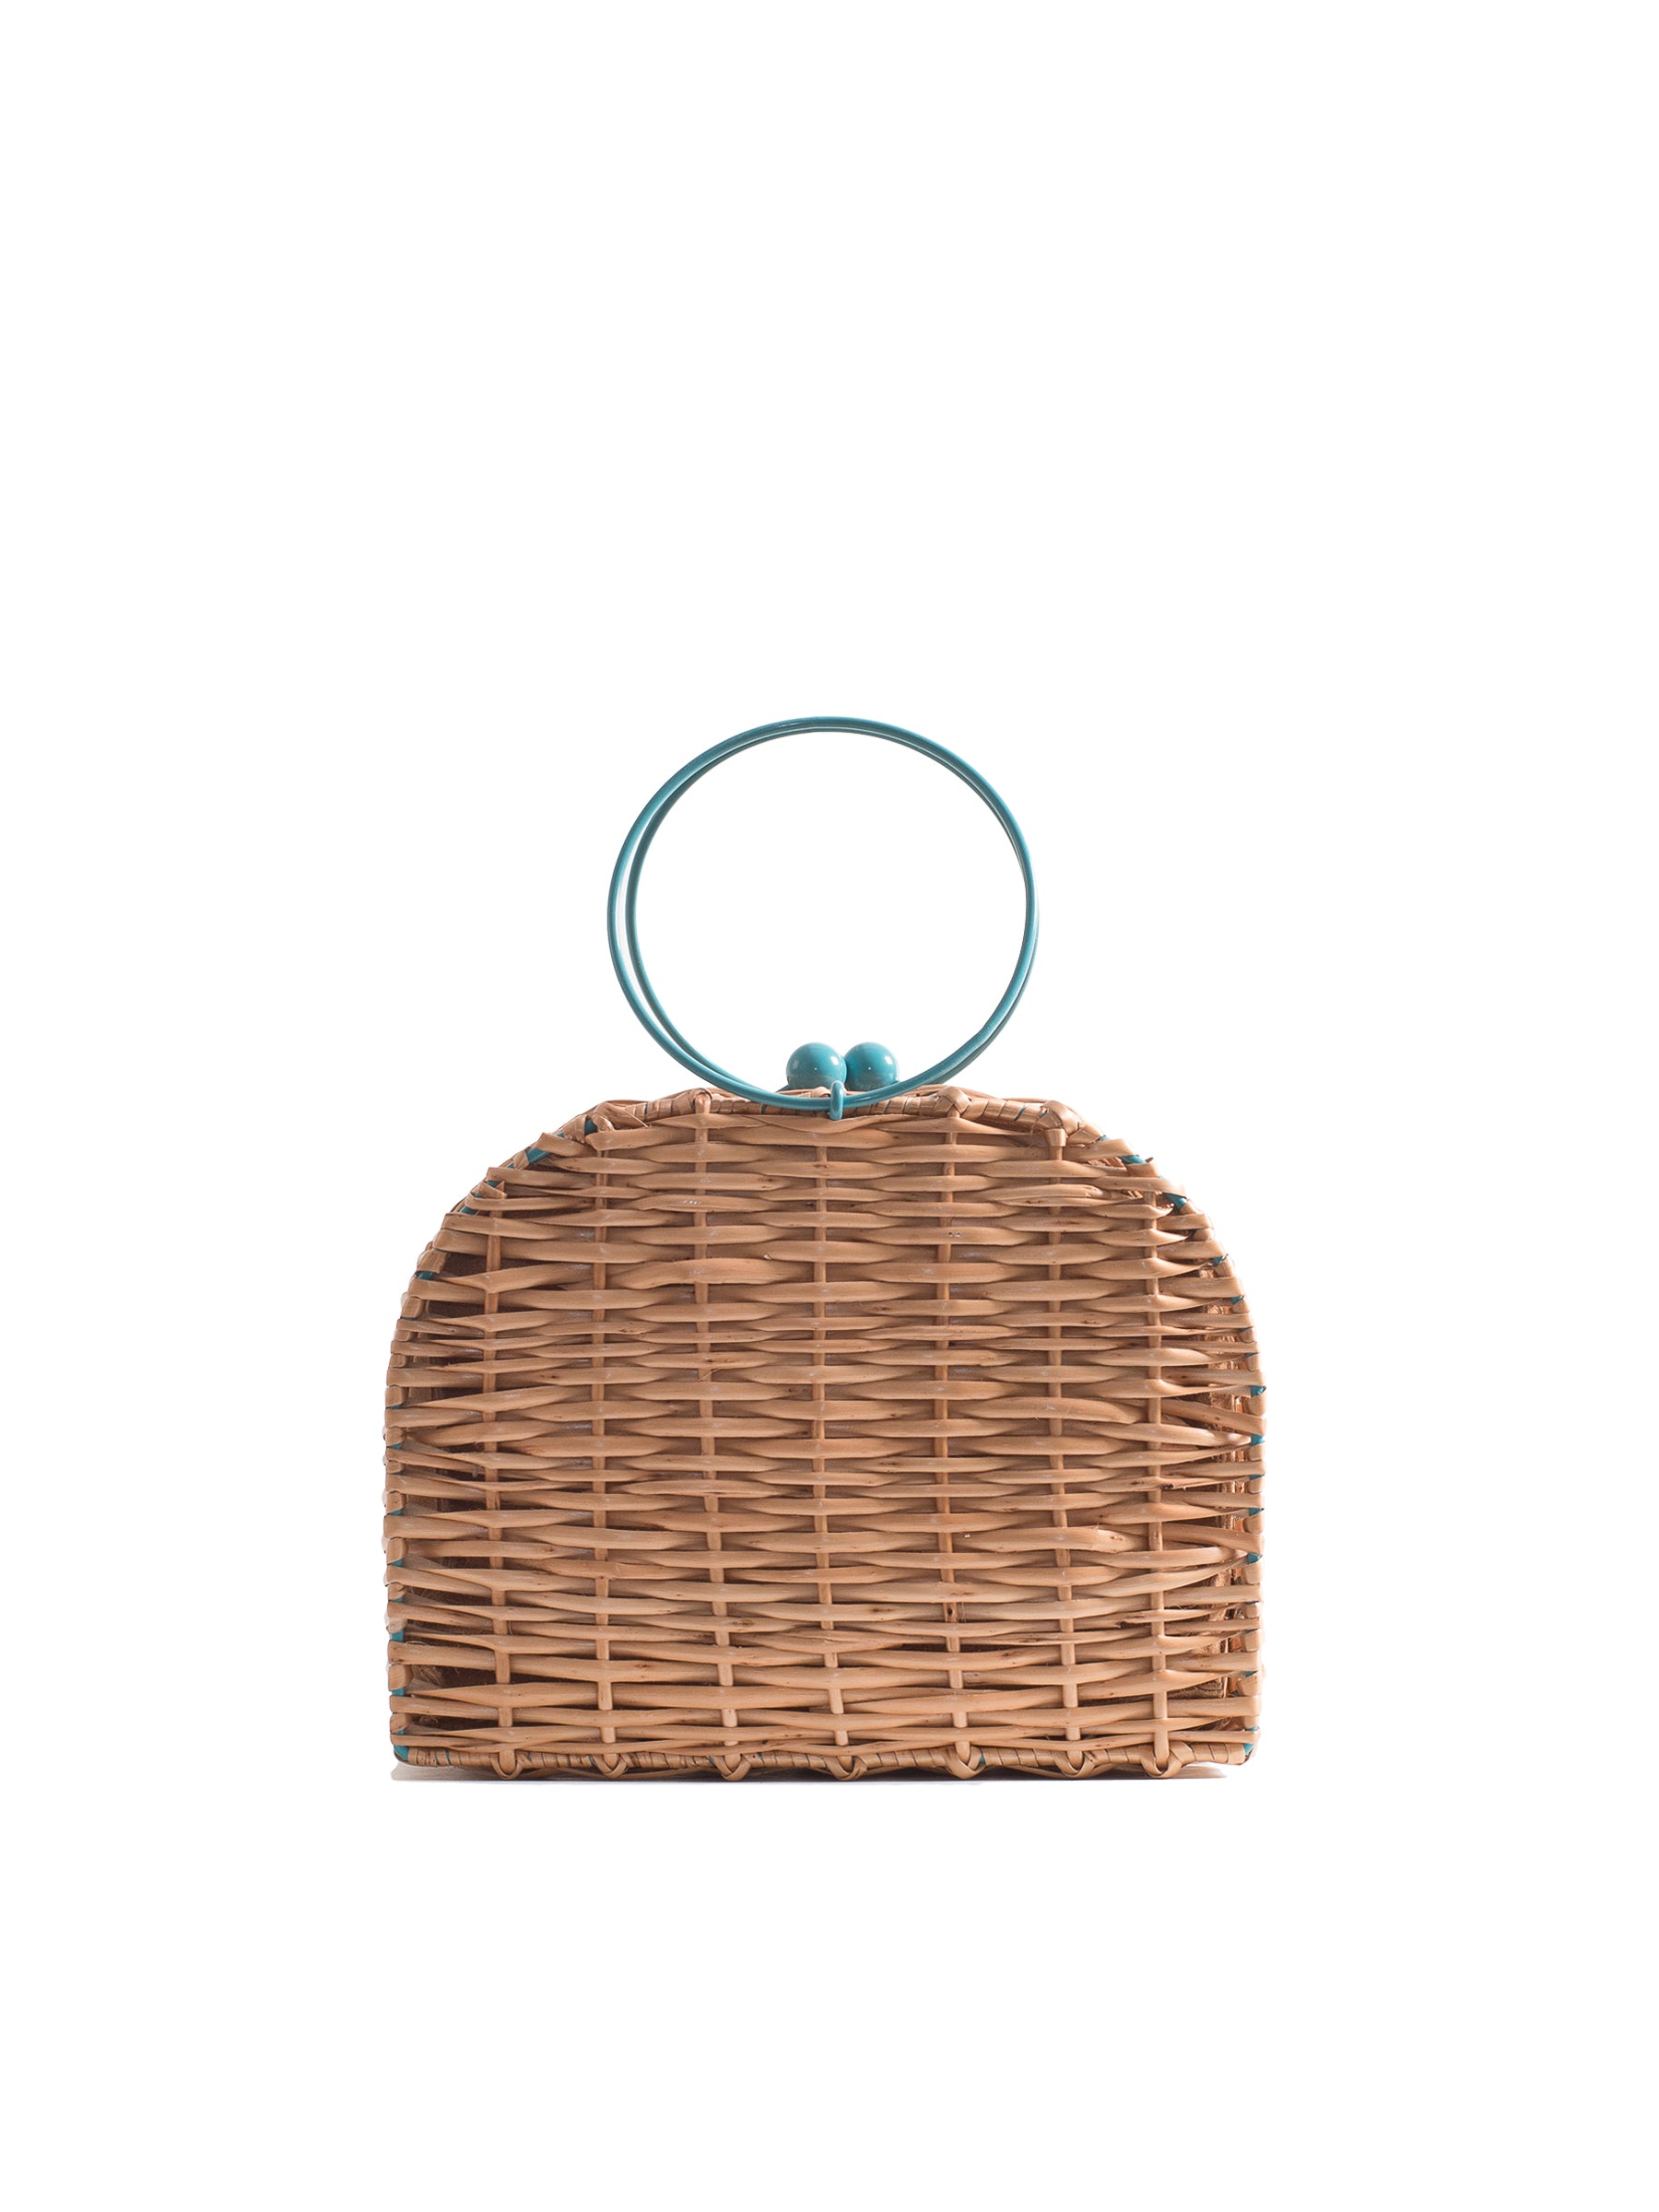 INTO THE BLUE WICKER BAG SHORT